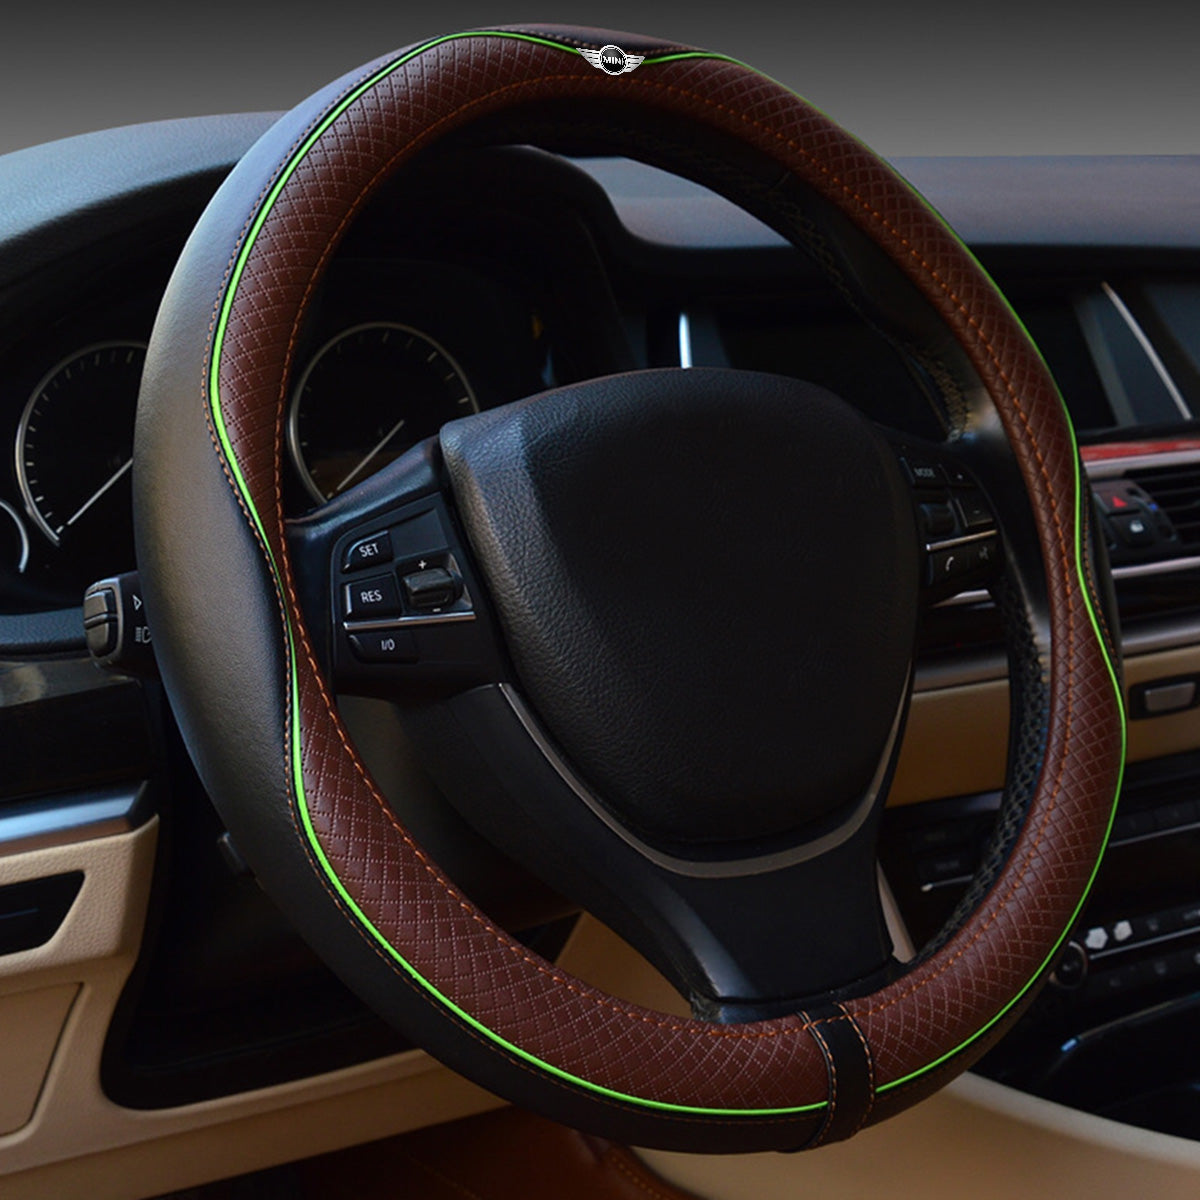 Enhance Your Ride with a Stylish Mini Cooper Steering Wheel Cover